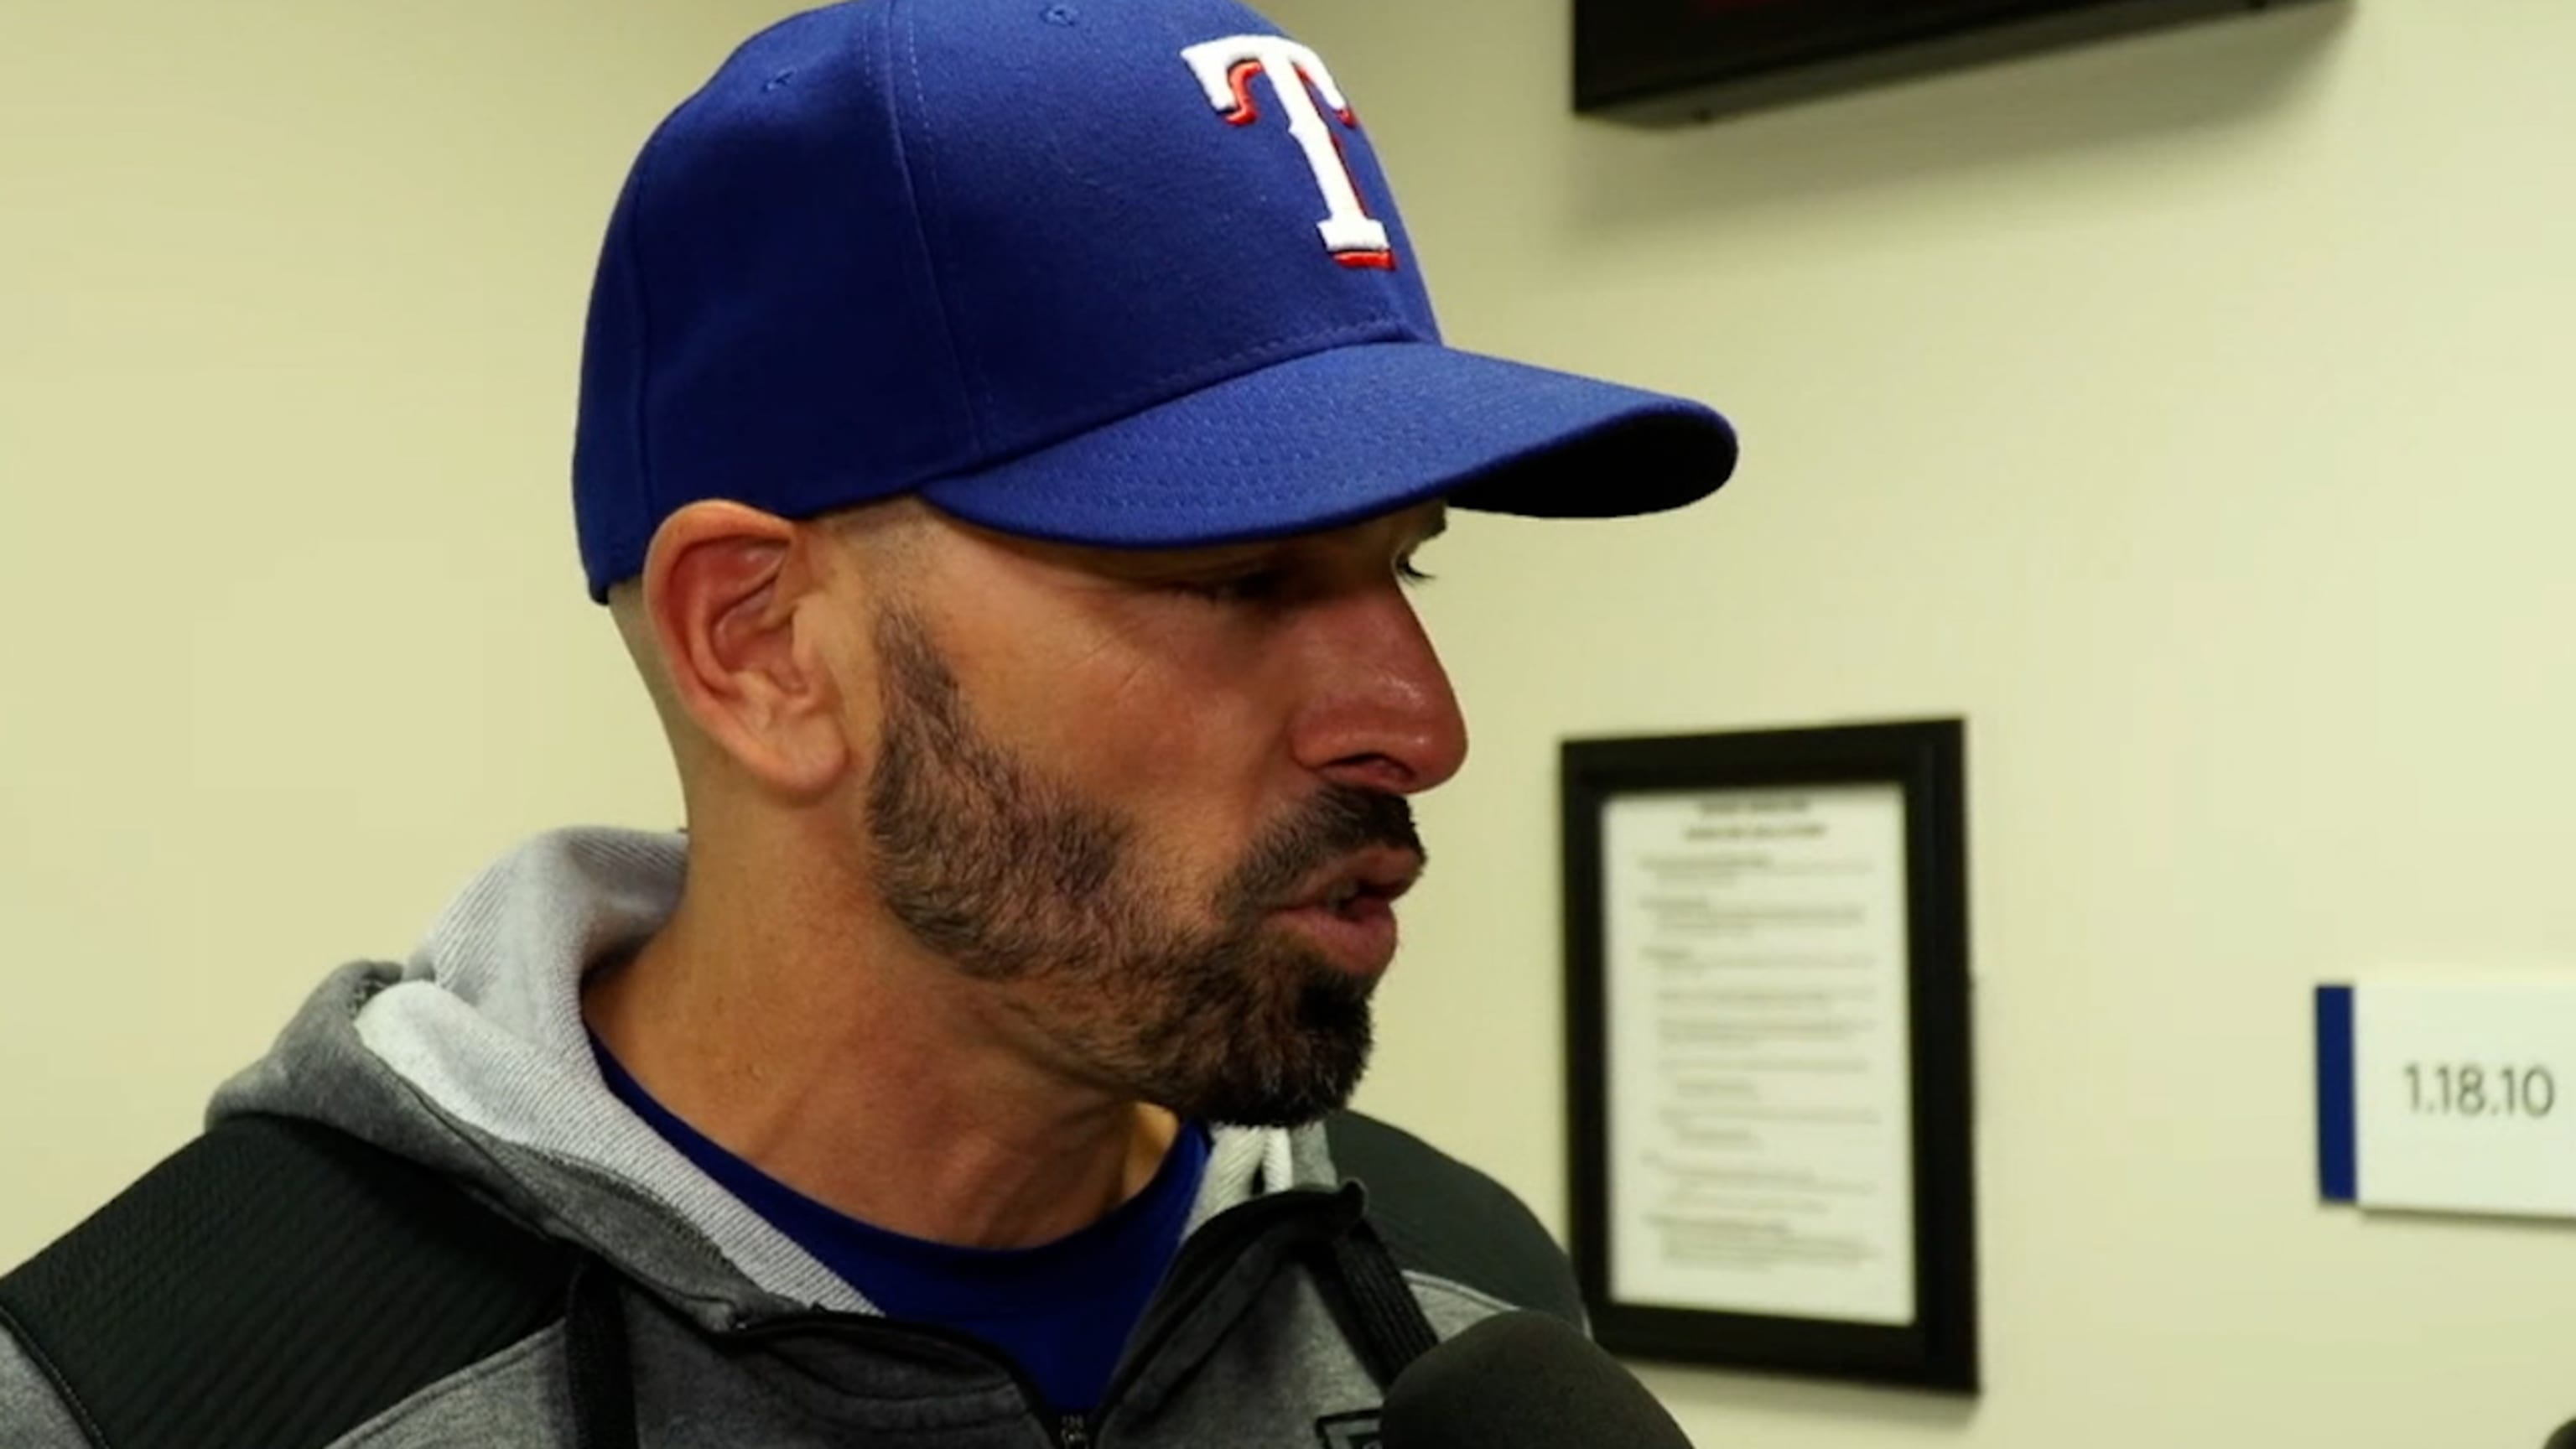 Rangers' Adolis García leaves game vs. Dodgers after hit by pitch